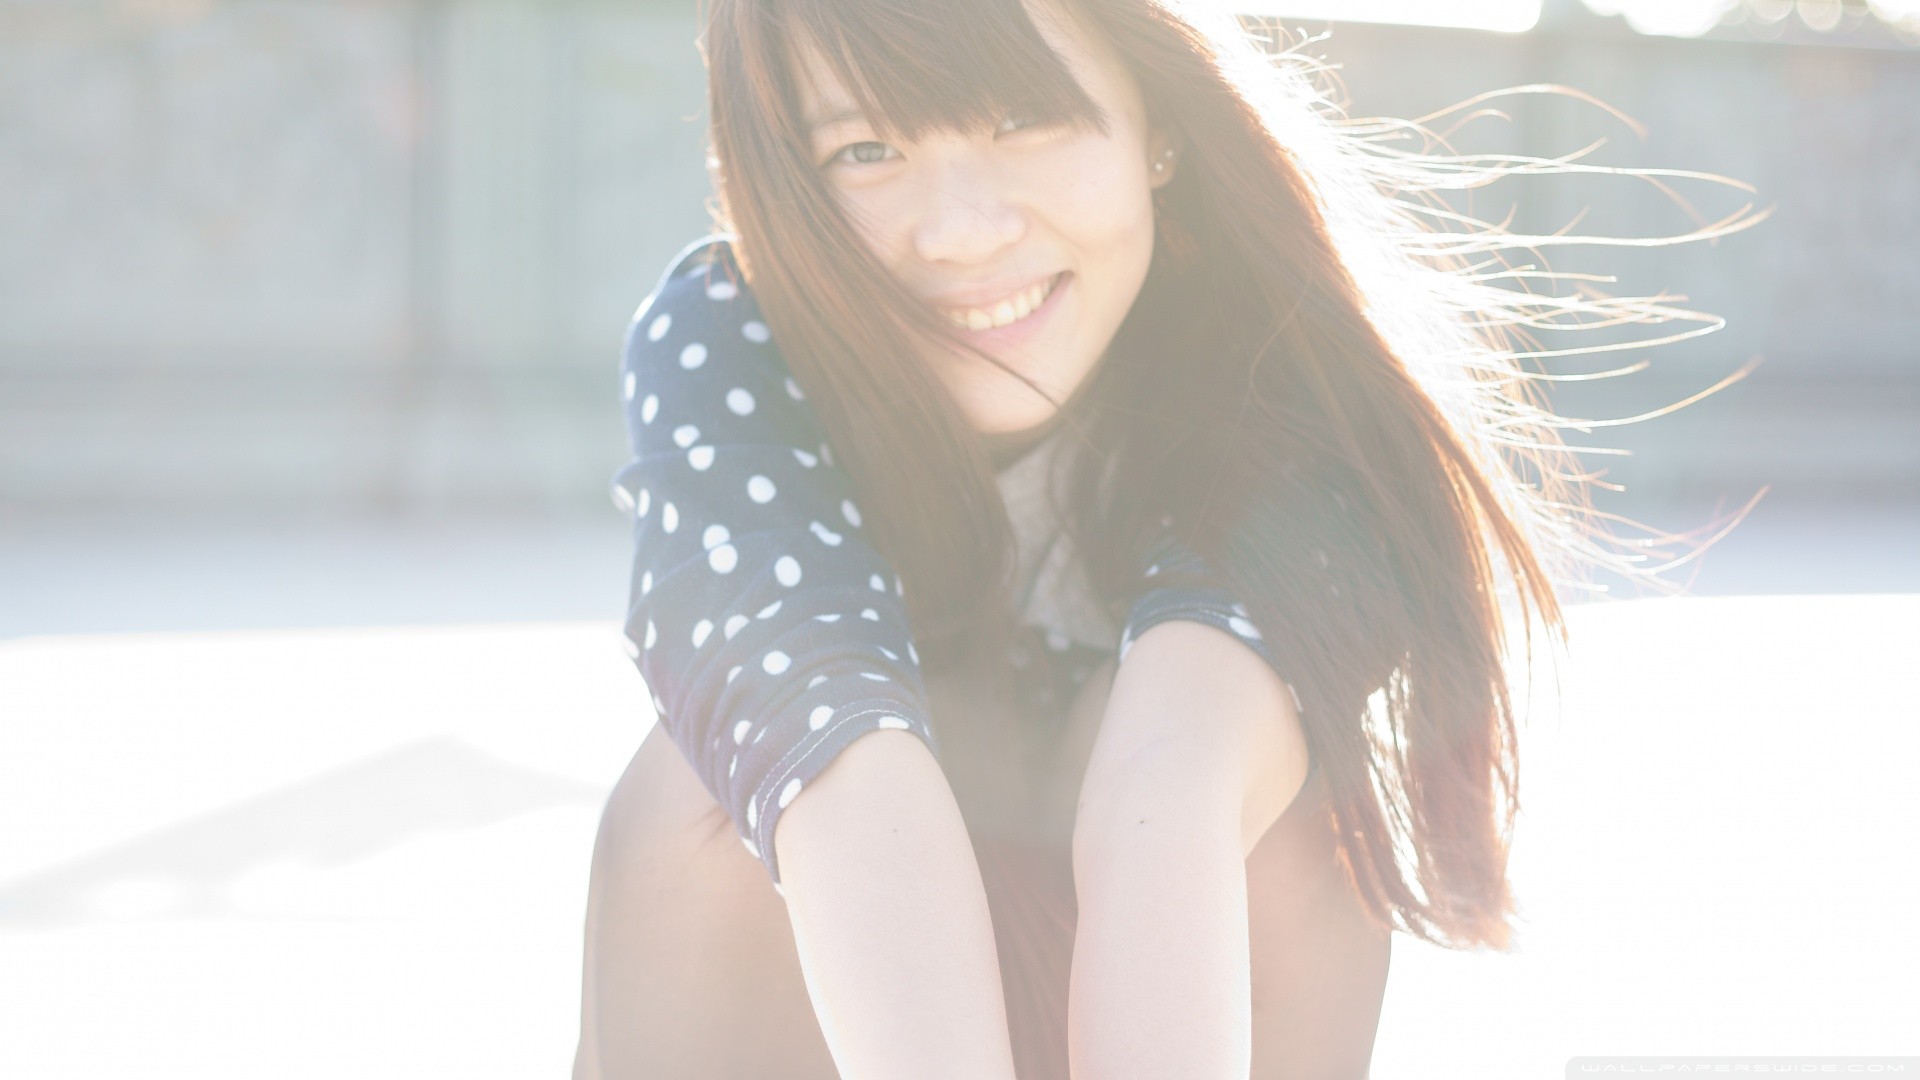 Women Asian Overexposed Redhead Smiling Windy Long Hair Bangs Hair In Face 1920x1080